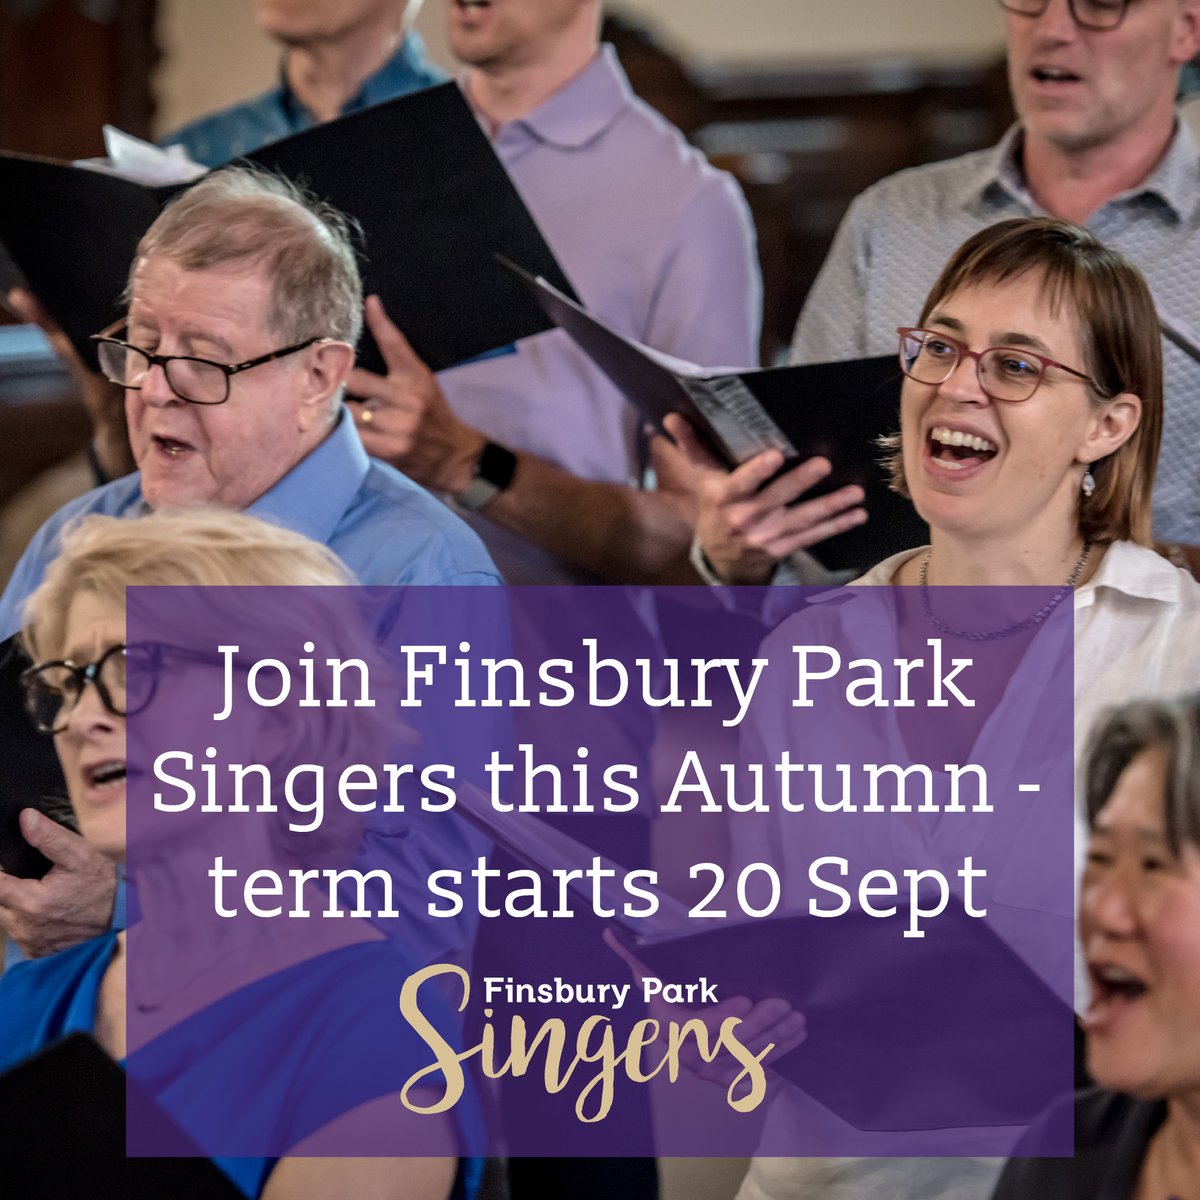 Come and join our friendly choir - no auditions! There are so many good reasons to sing - the benefits of community, good breathing, a shared endeavour, friendship and a wonderful dose of endorphins 🎶 Tuesdays, 7.30pm to 9pm at Christ Church, Highbury bit.ly/fps-autumn-2022